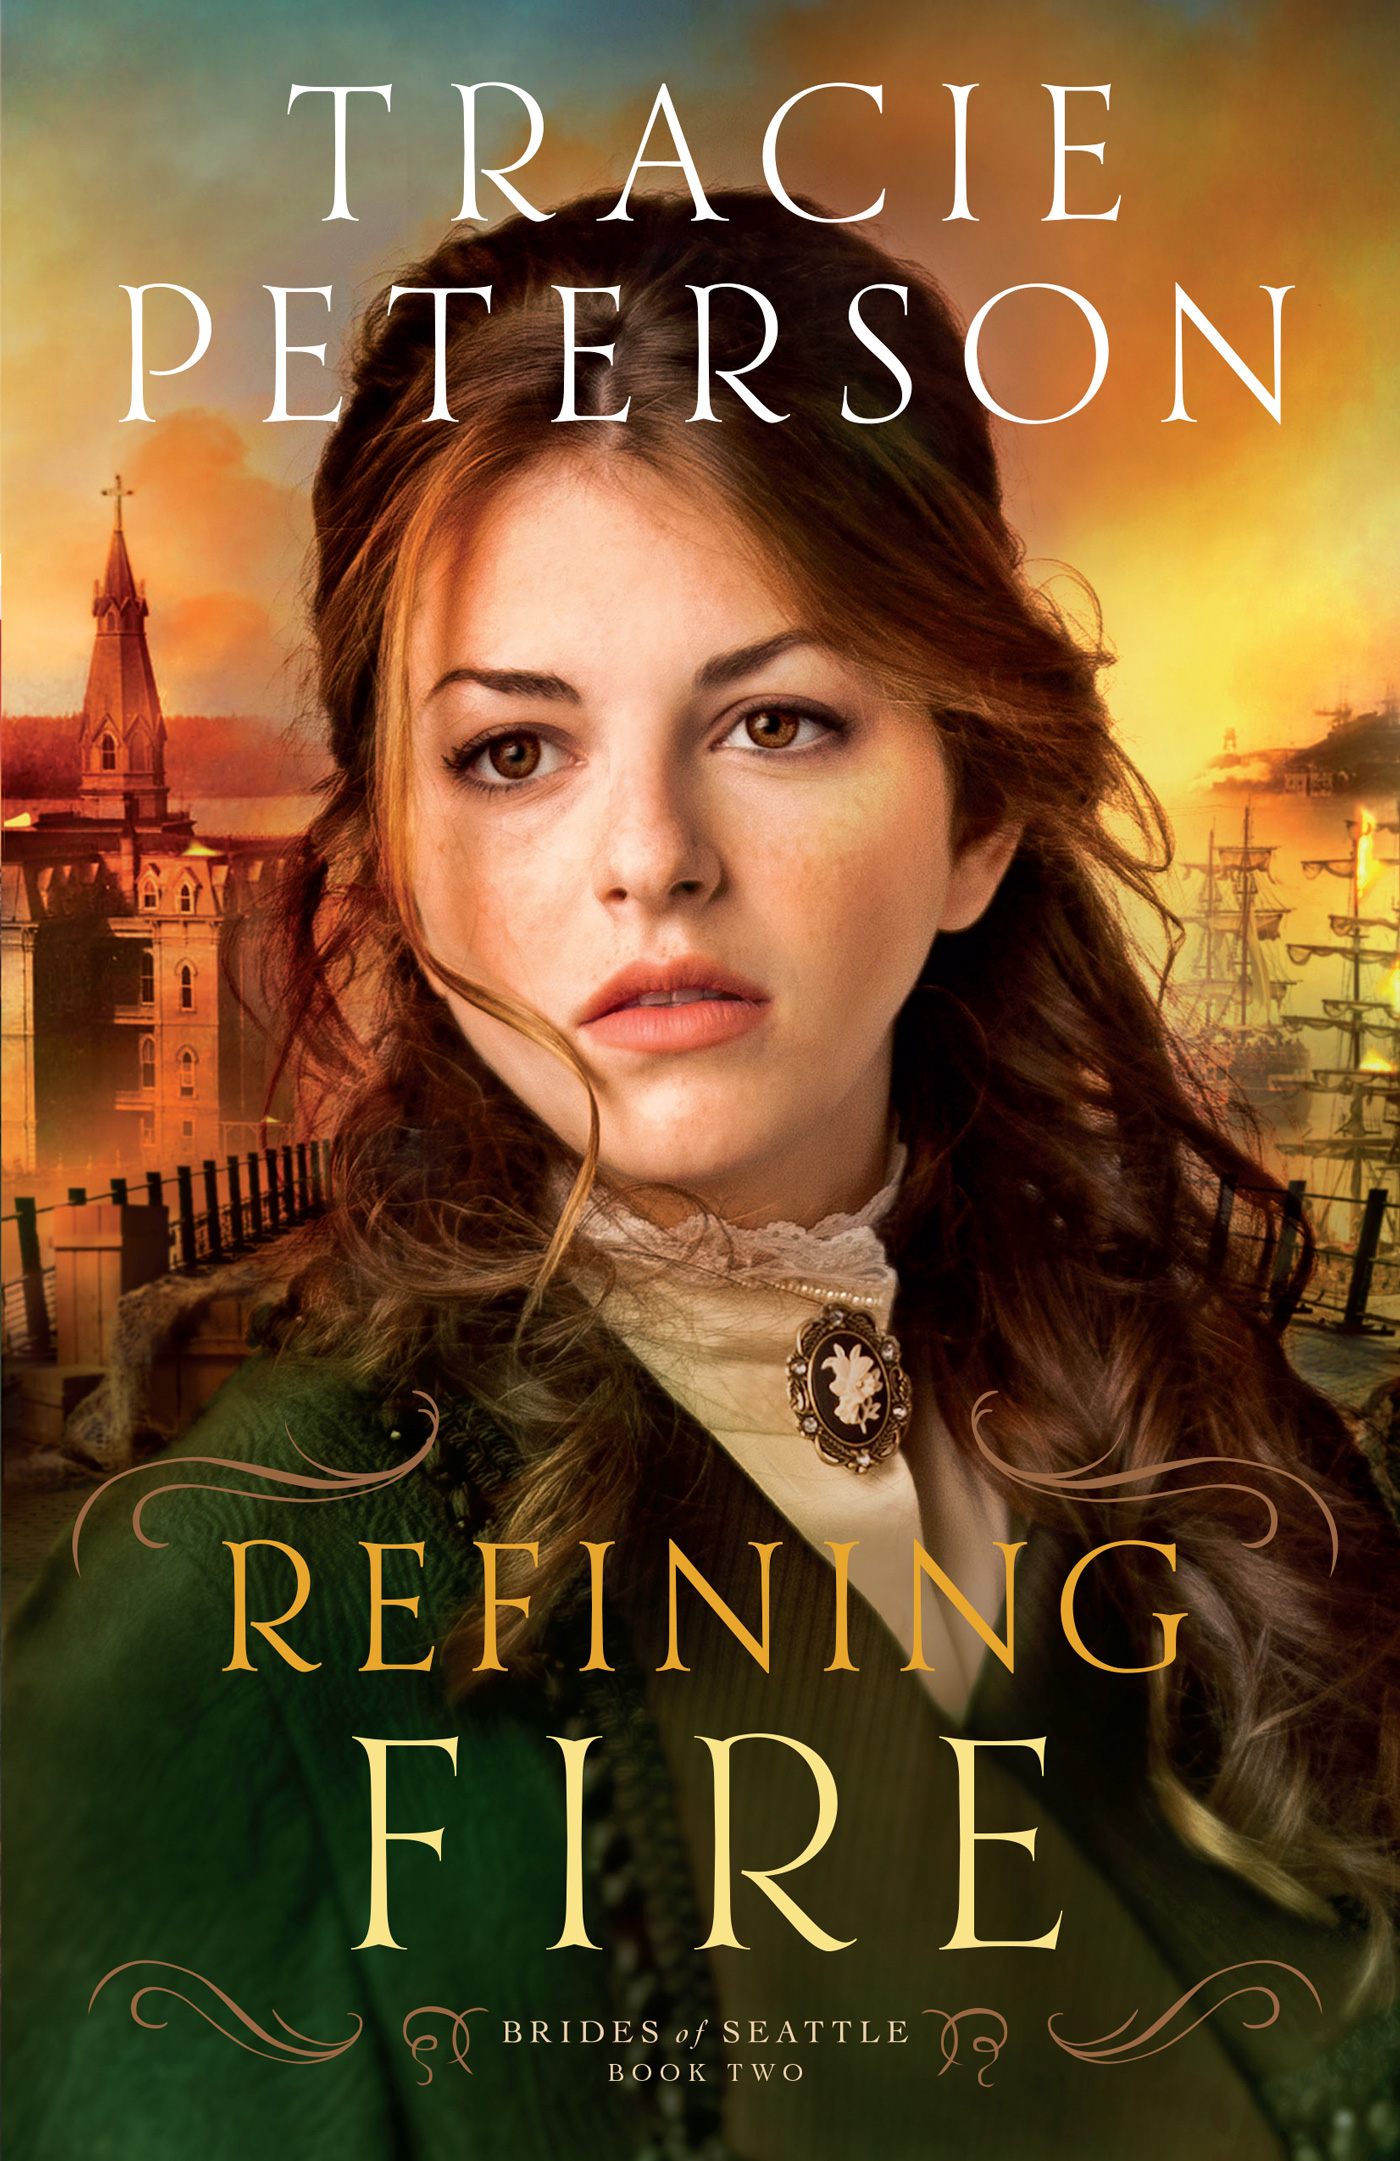 Refining Fire (2015) by Tracie Peterson